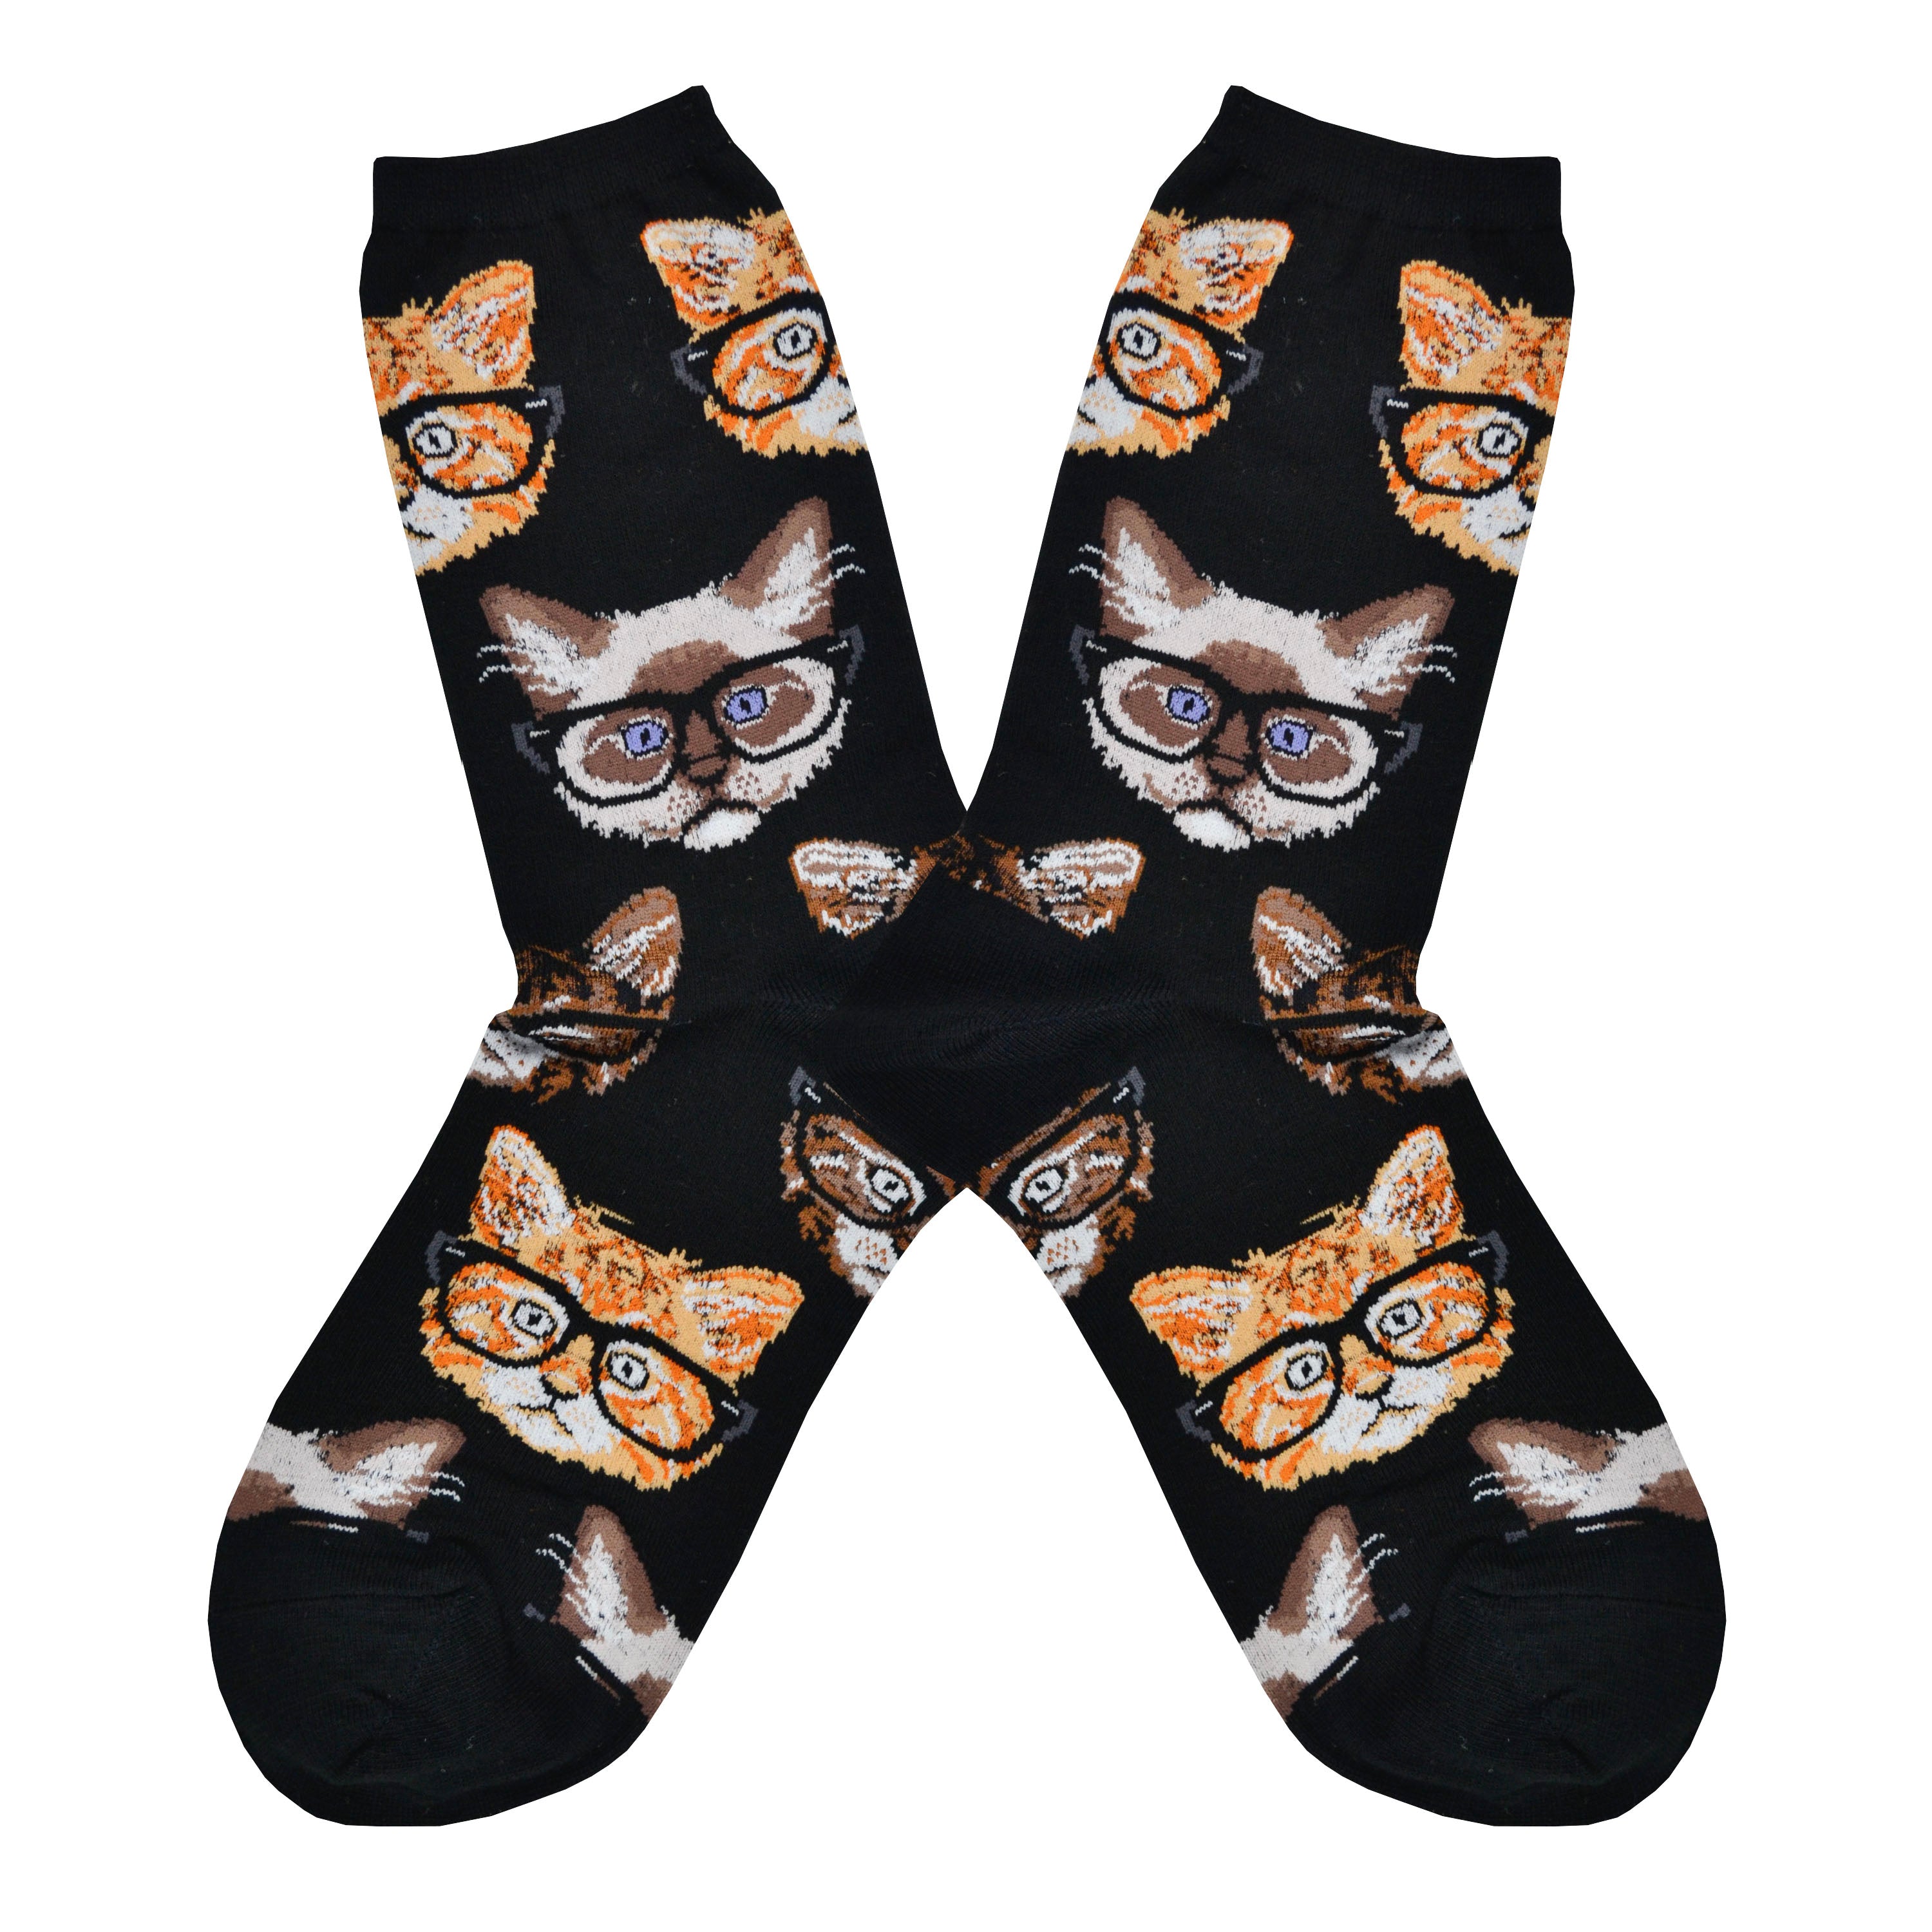 Shown in a flatlay, a pair of black socks with different types of cat faces wearing black rimmed 